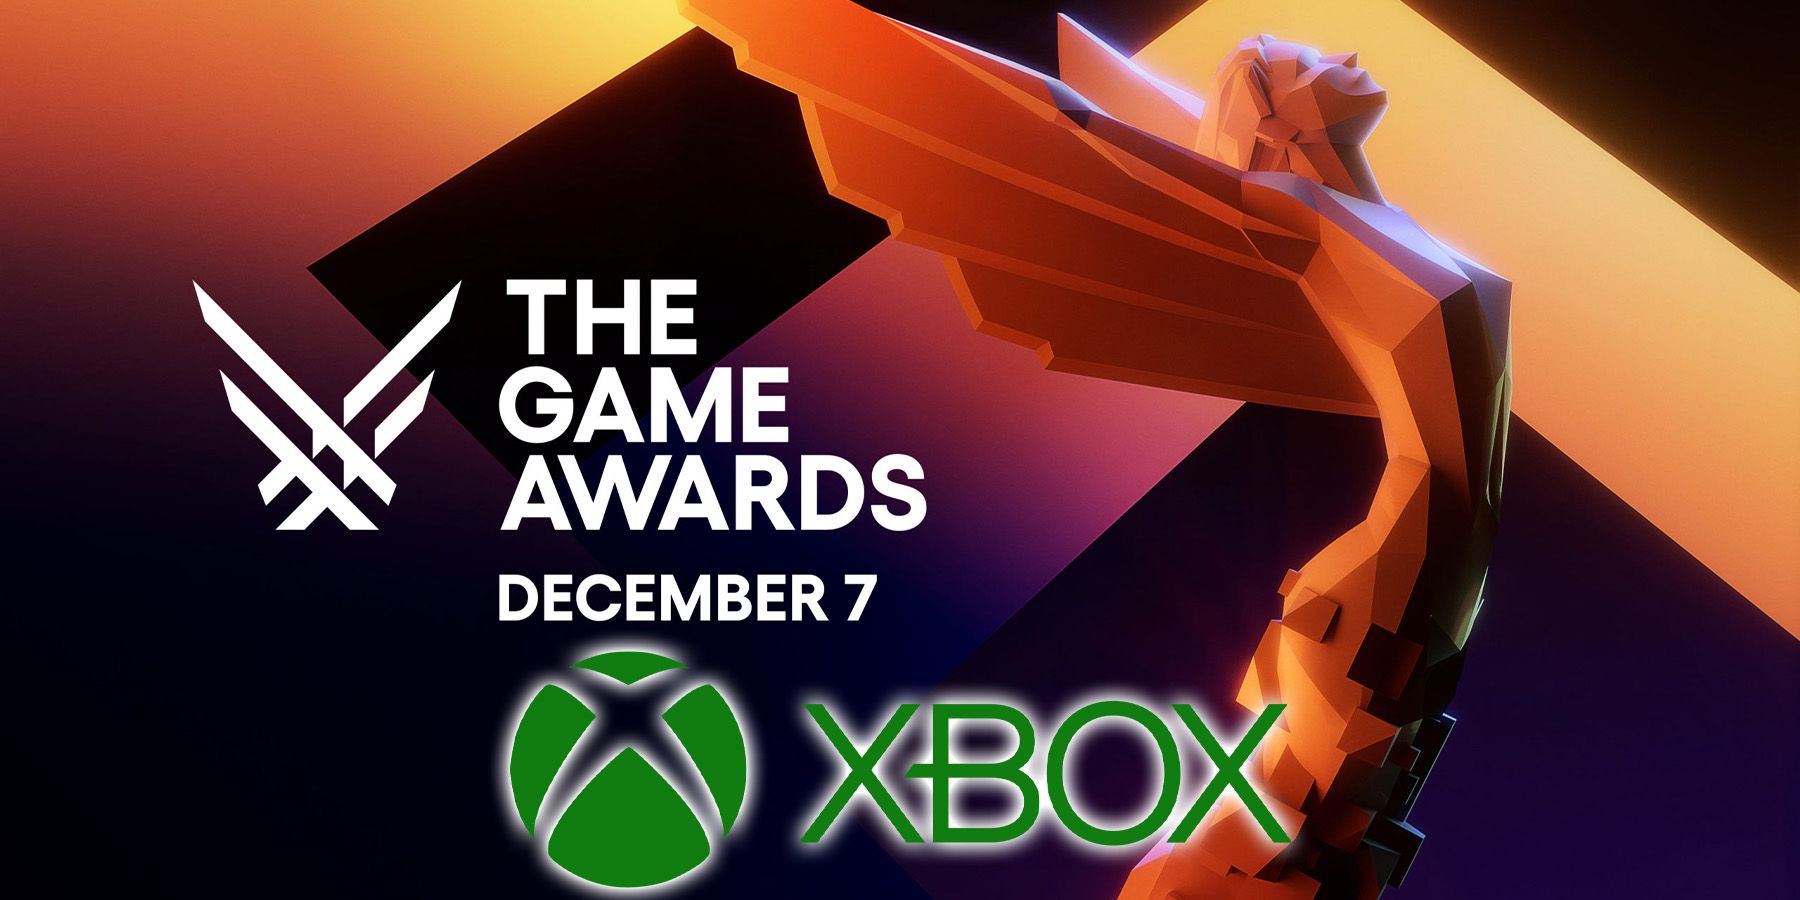 The Xbox logo on The Game Awards 2023 announcment image